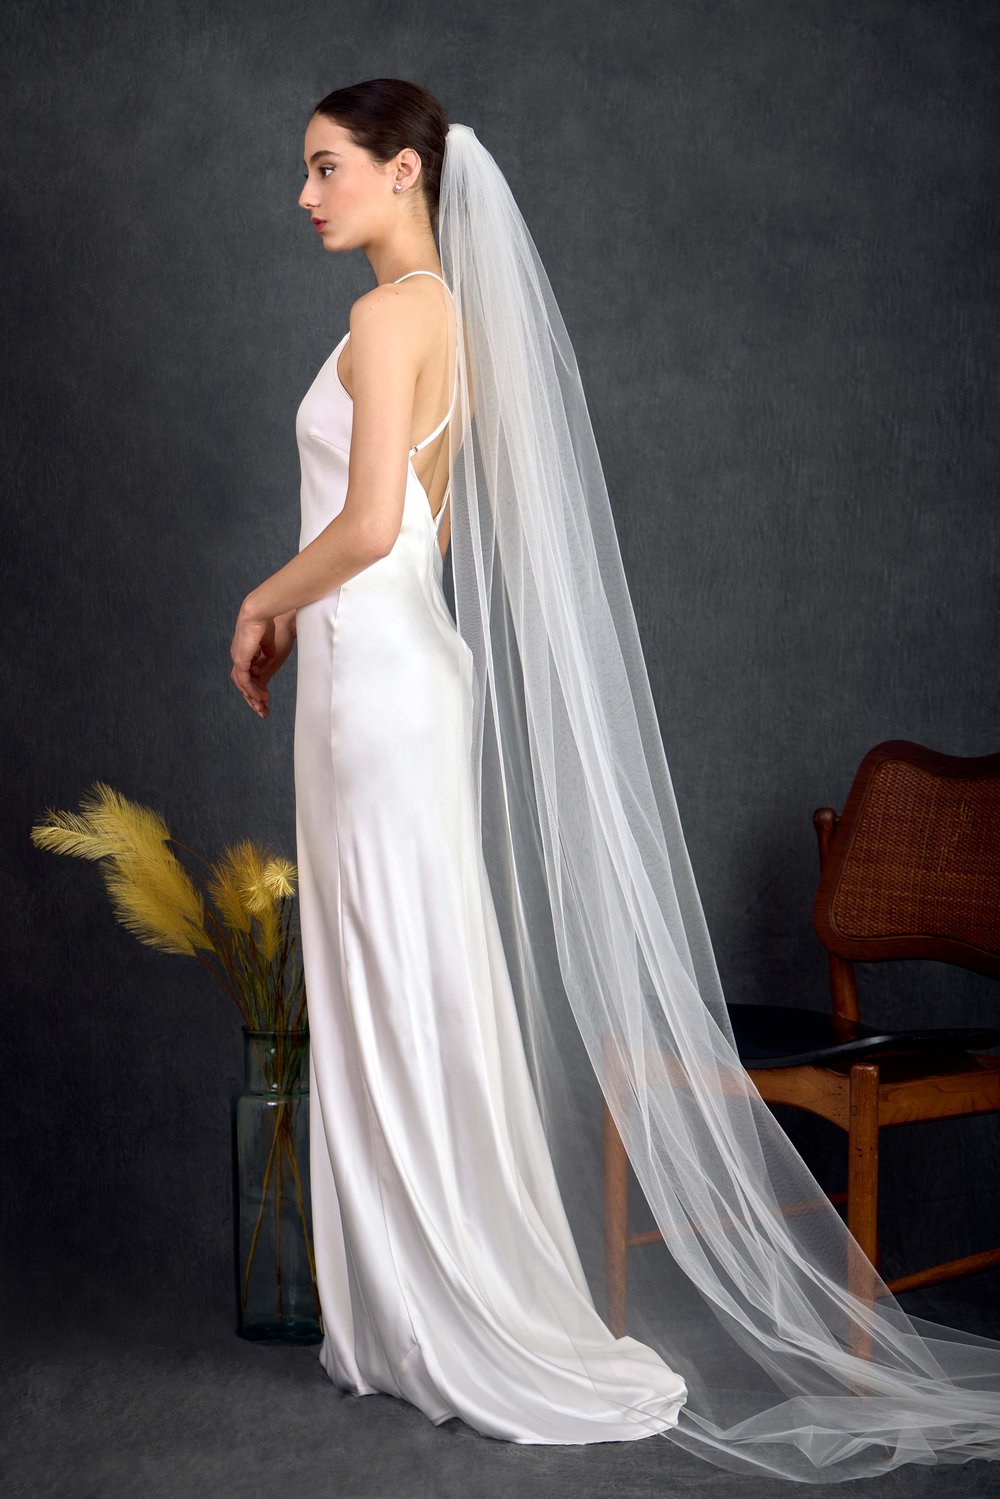 Ivory/White, Tulle Cathedral Length Bridal Veil 108 - NK Bride